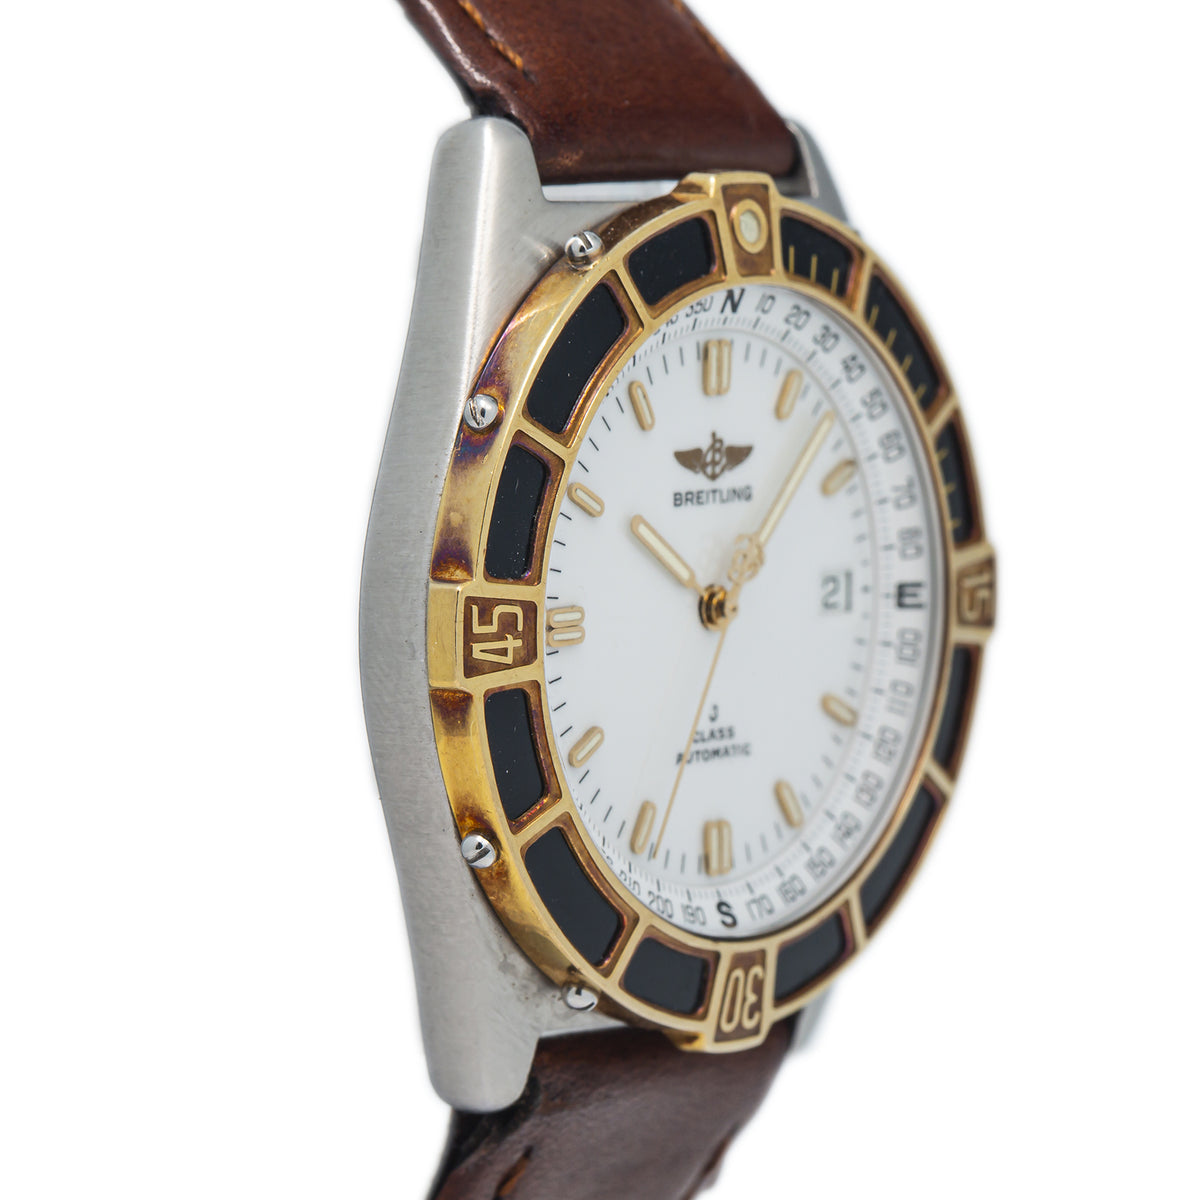 Breitling J Class 80250 StainlessSteel Gold White Dial Date Automatic Watch 40mm